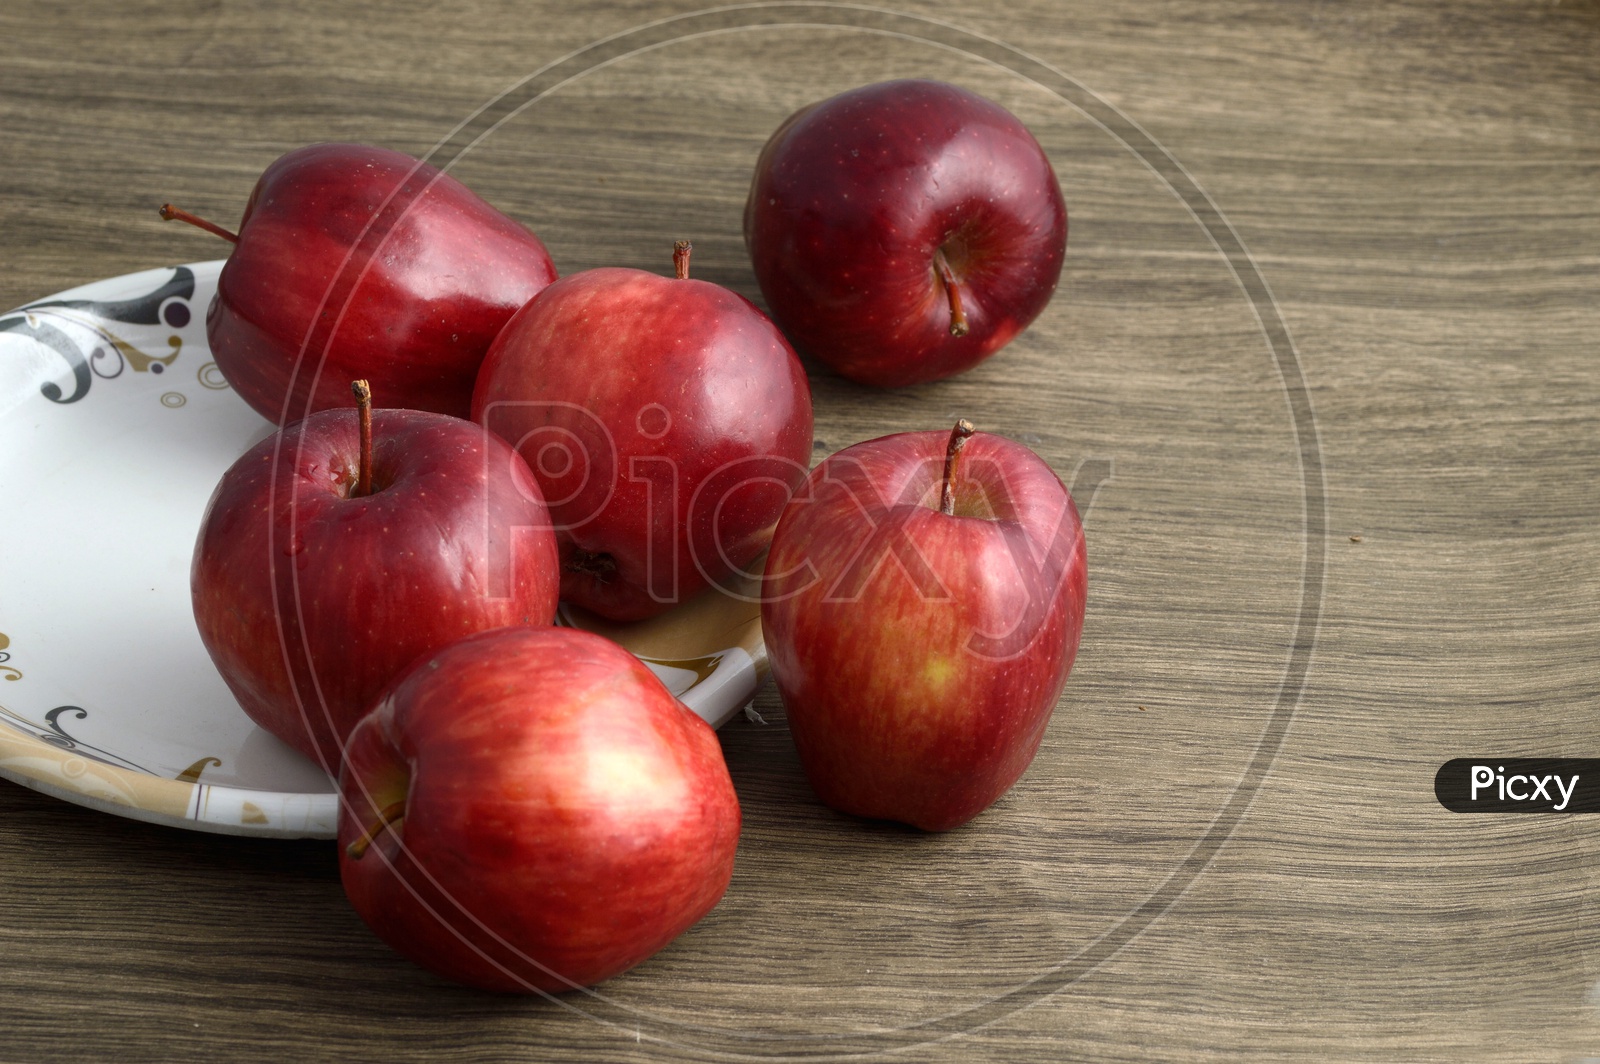 Ripen Red Apples  On a  Plate Over an Isolated Wooden Background